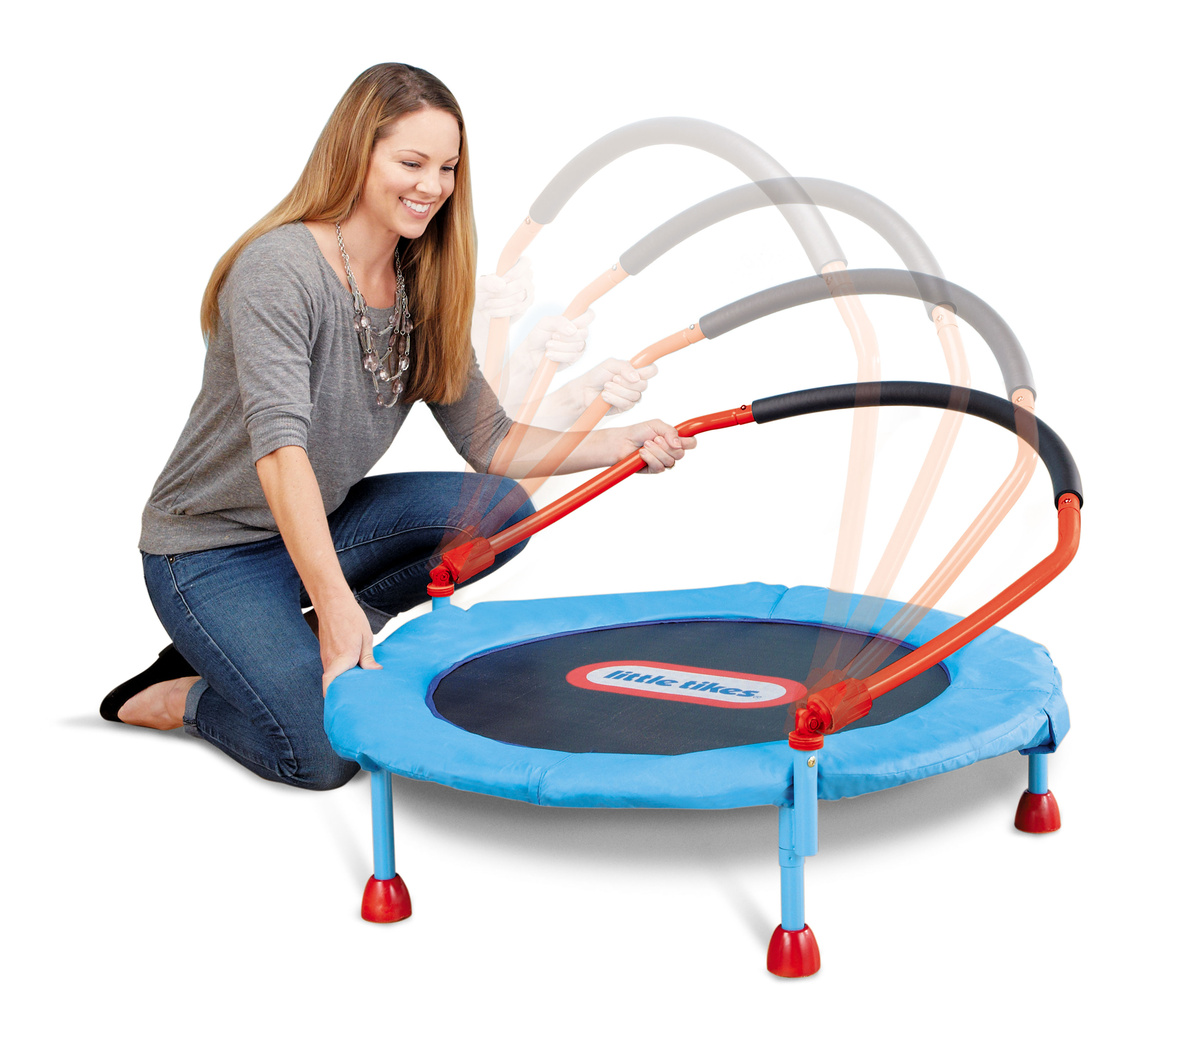 How To Disassemble Little Tikes Trampoline